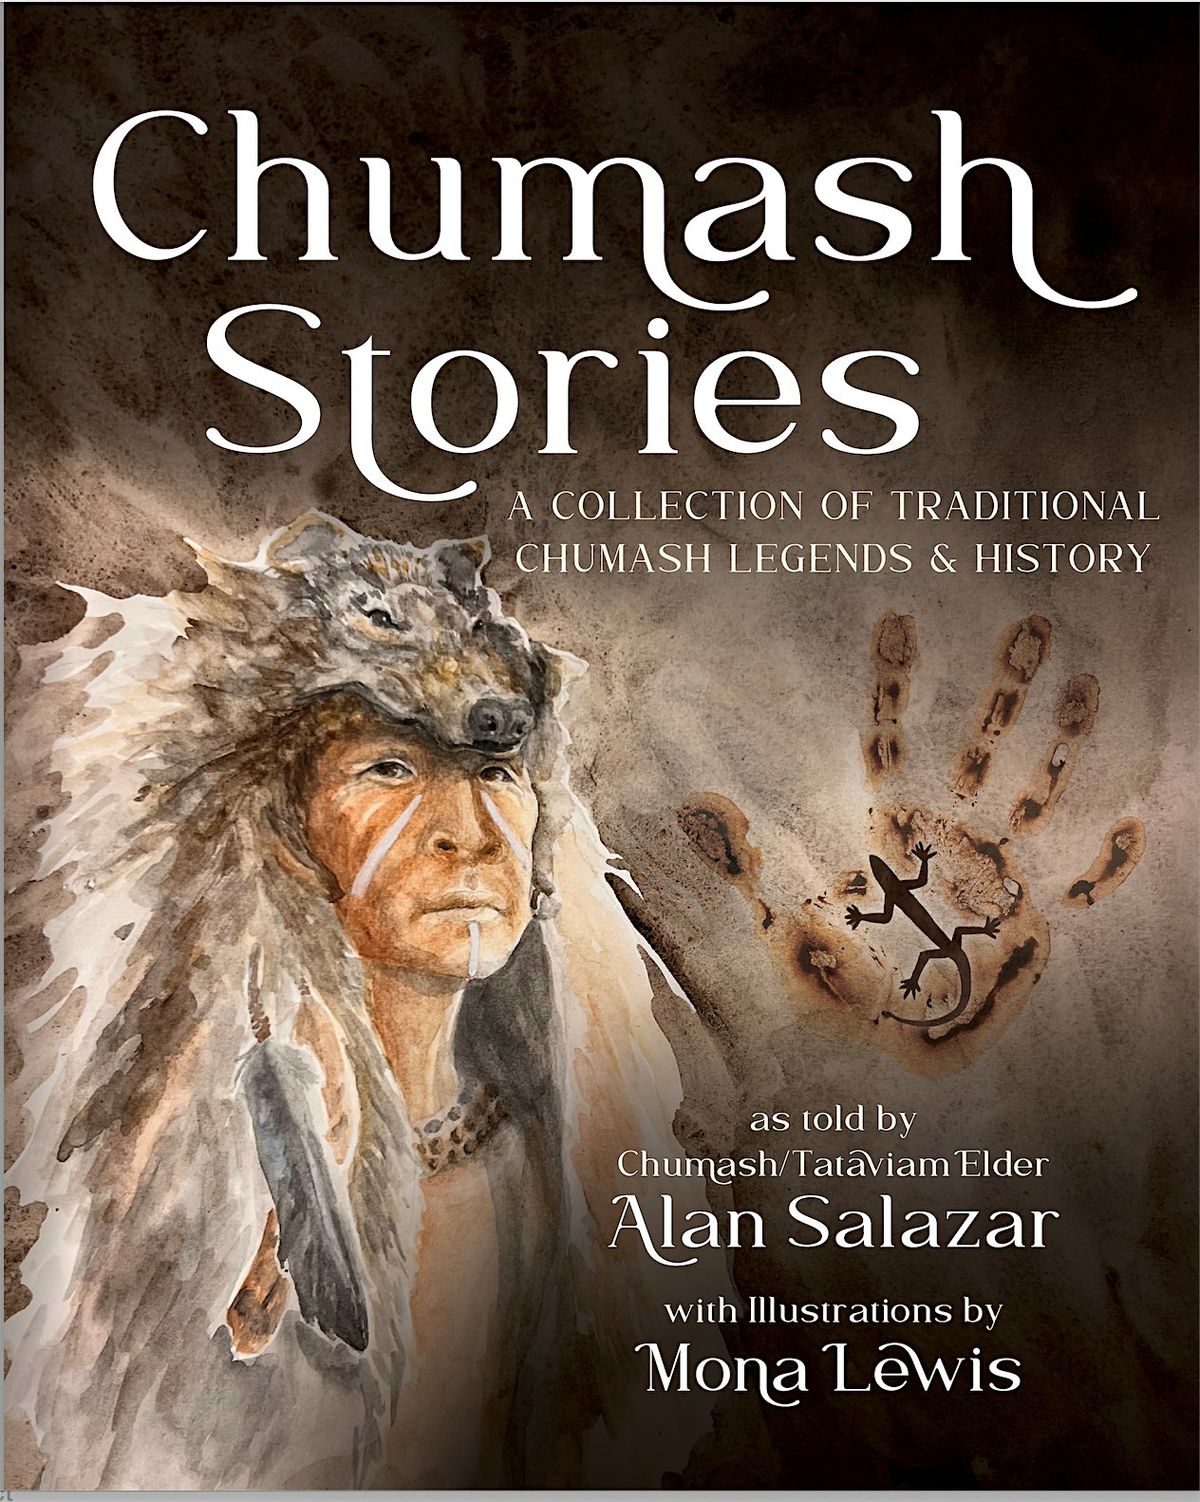 Historical Storytelling and Natural Art with Alan Salazar and Mona Lewis